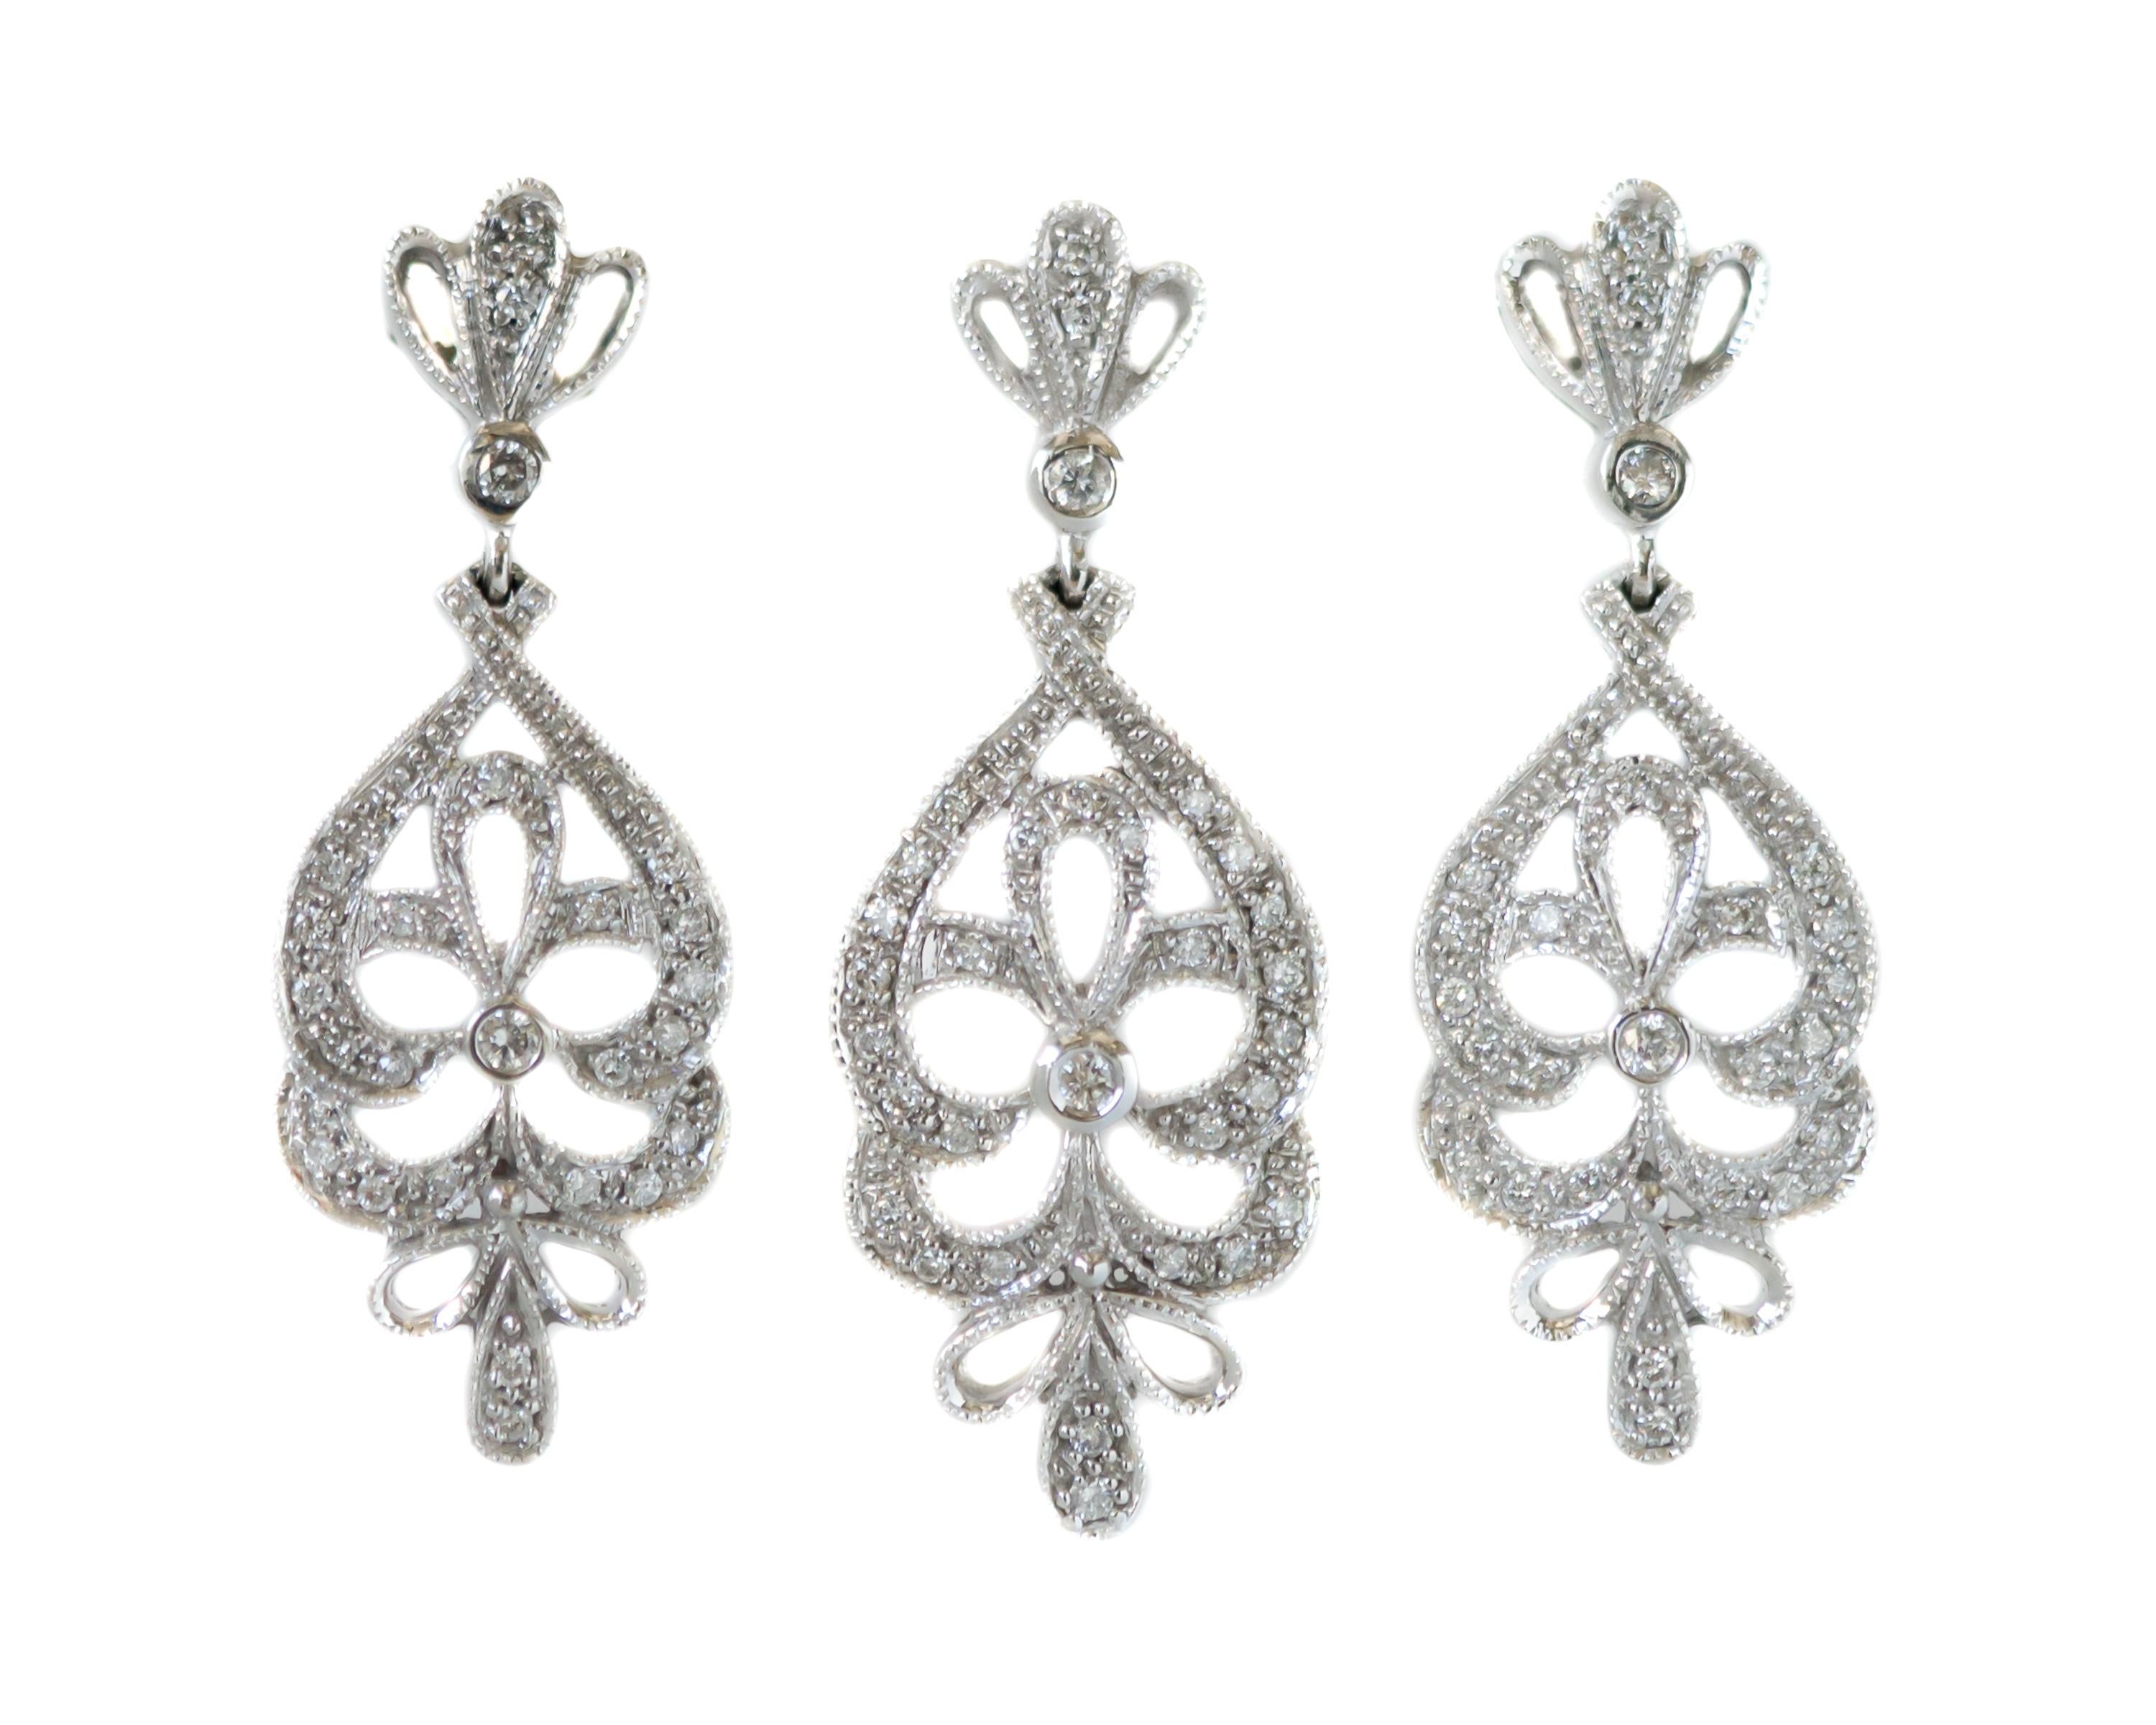 1950s 3.0 carat total Diamond Chandelier Necklace and Earring Set - 14 Karat White Gold, Diamonds

Features:
3.0 carat total Diamonds
14 Karat White Gold Setting and Wheat Chain
Chandelier Earrings with Matching Necklace
Made in Italy
Sliding